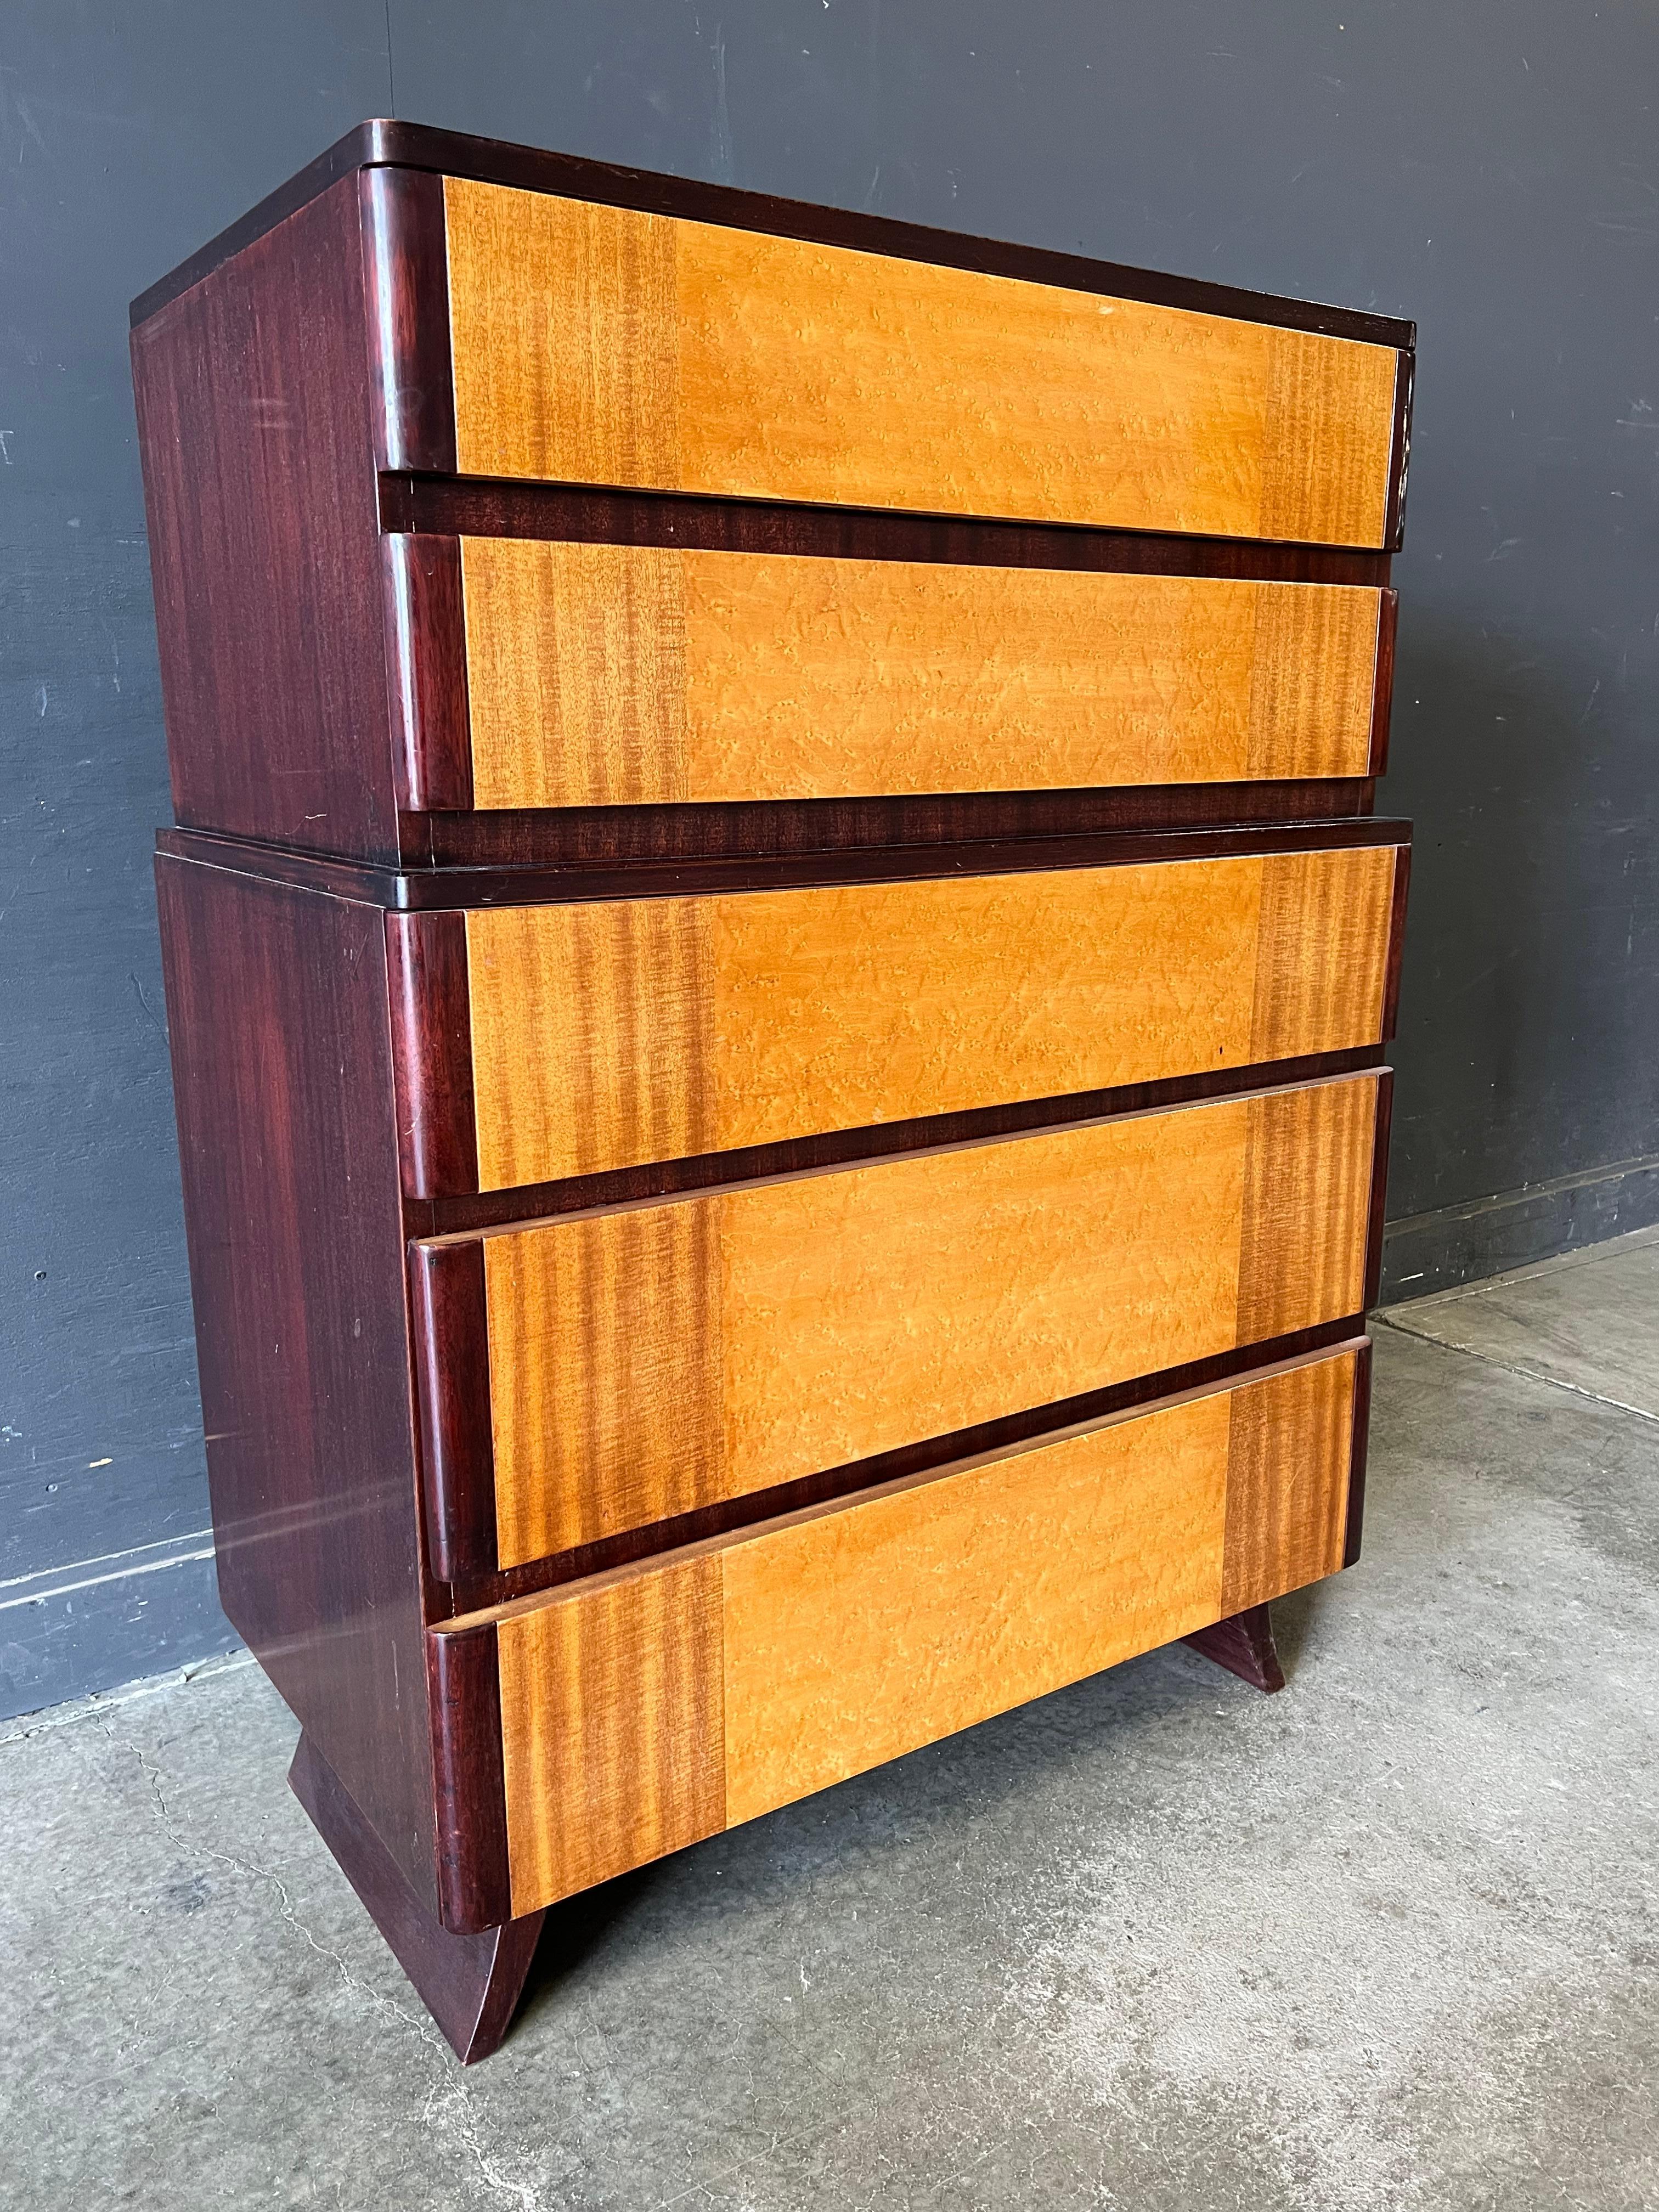 This is a wonderful Art Deco style chest of drawers either designed by Eliel Saarinen for R-Way or certainty in the style. This gentleman’s chest of drawers is available with our other listing for low dresser. All the pieces are in nice condition